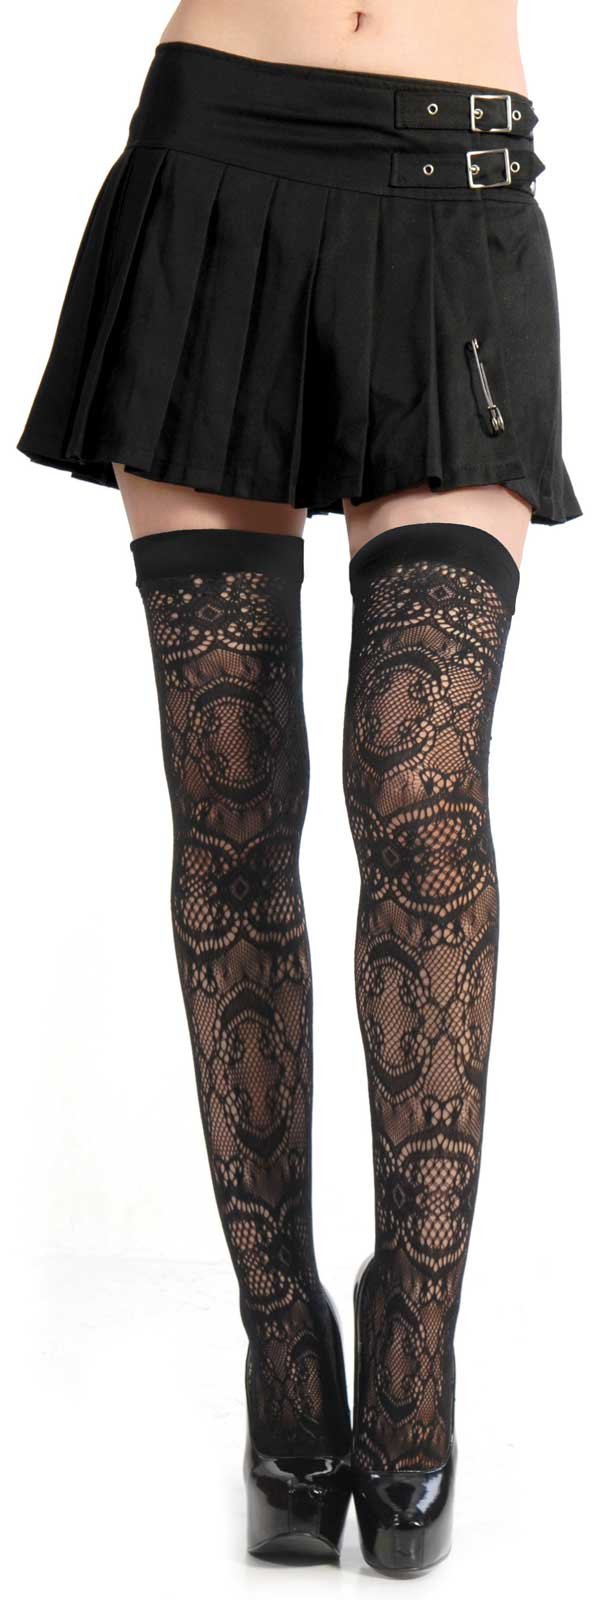 Lace Adult Thigh Highs